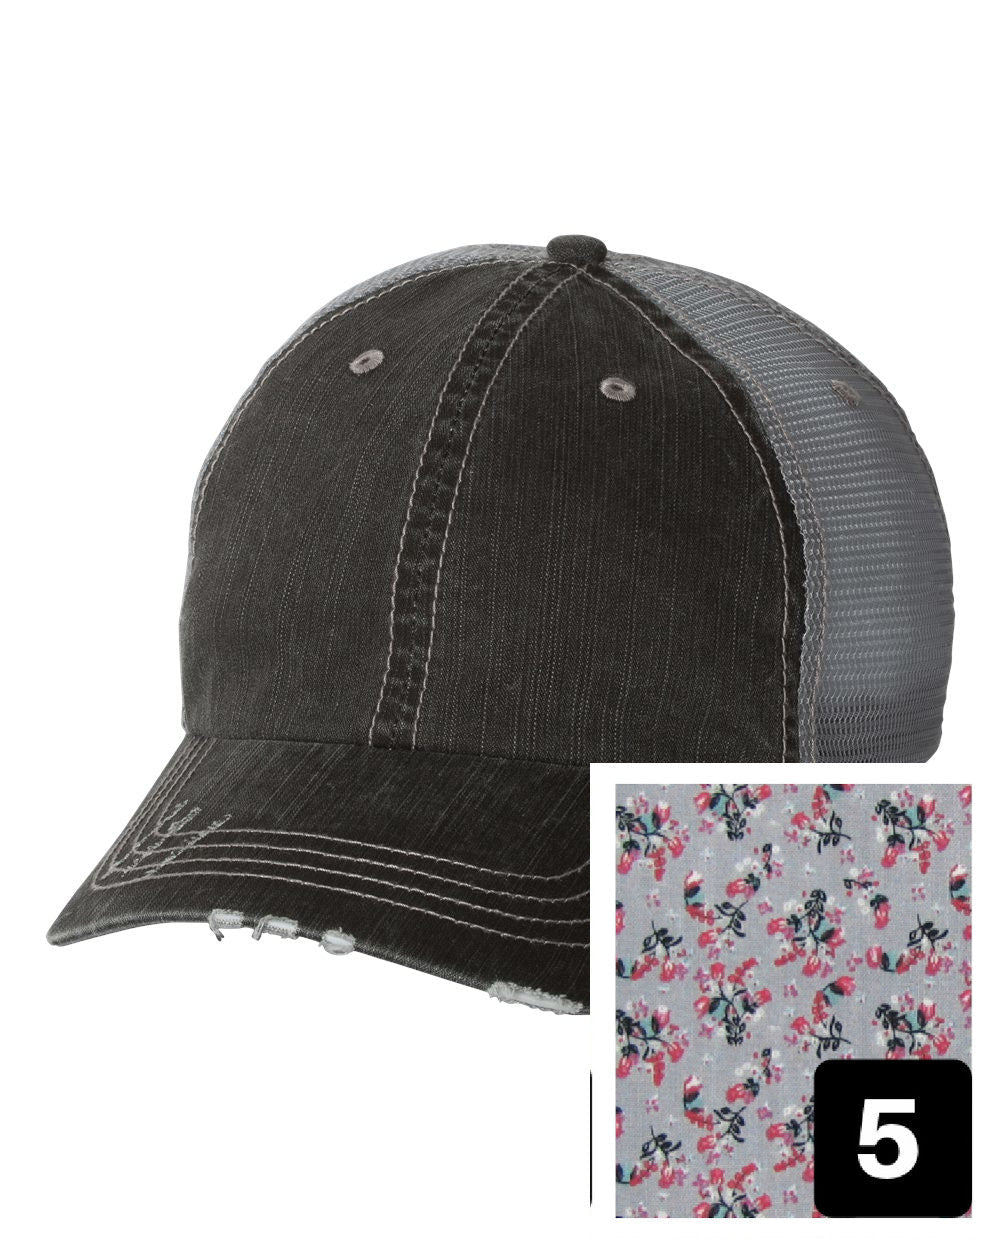 gray distressed trucker hat with purple and pink floral fabric state of Illinois